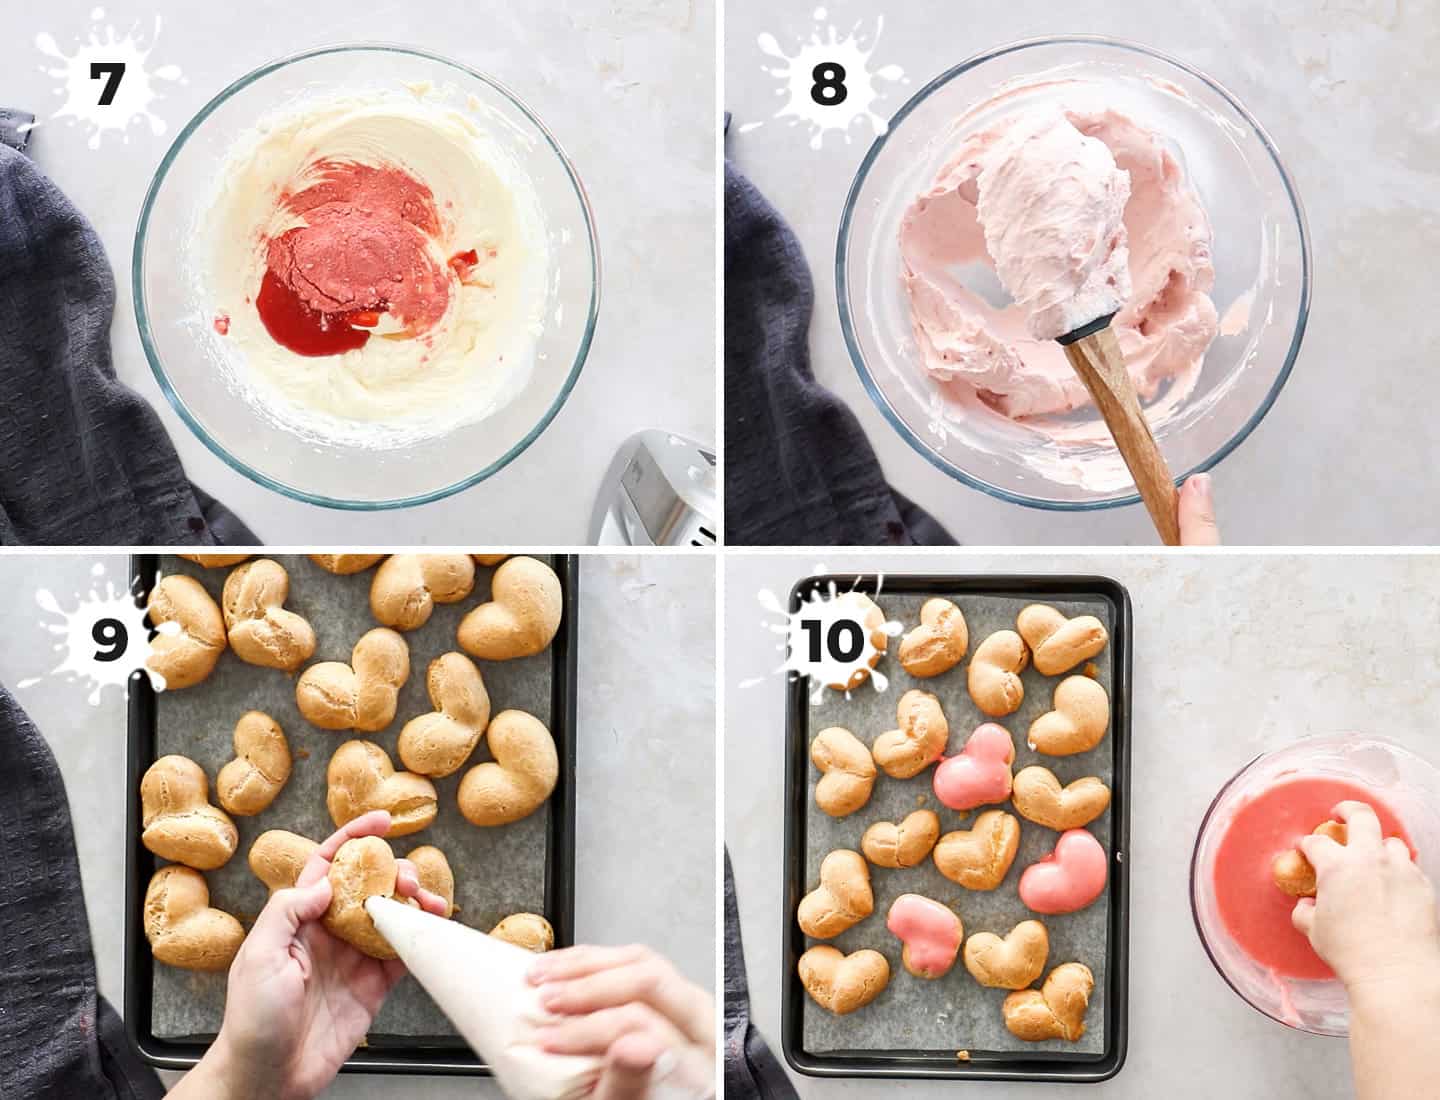 A collage of 4 images showing how to fill and glaze the cream puffs.